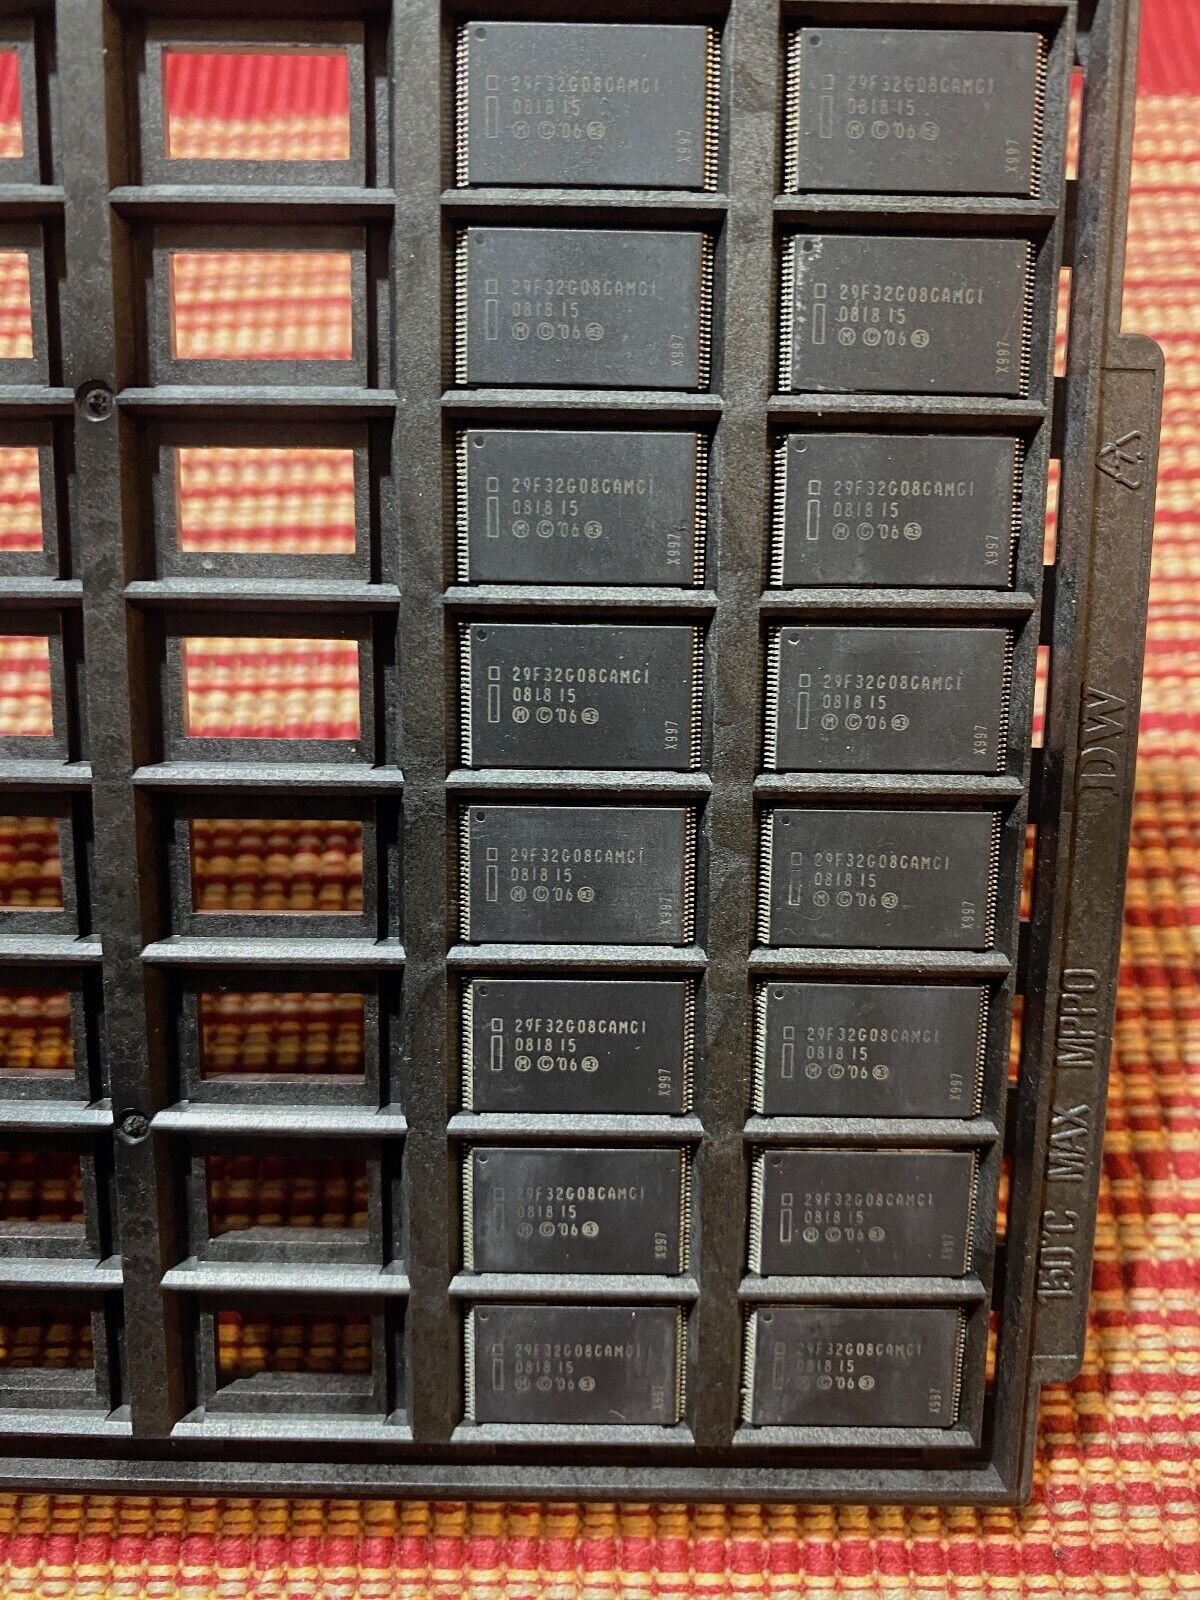 (8pcs.) 29F32G08CAMC1 Micron NAND 16GB Flash Memory Features TRAY of 8 pieces